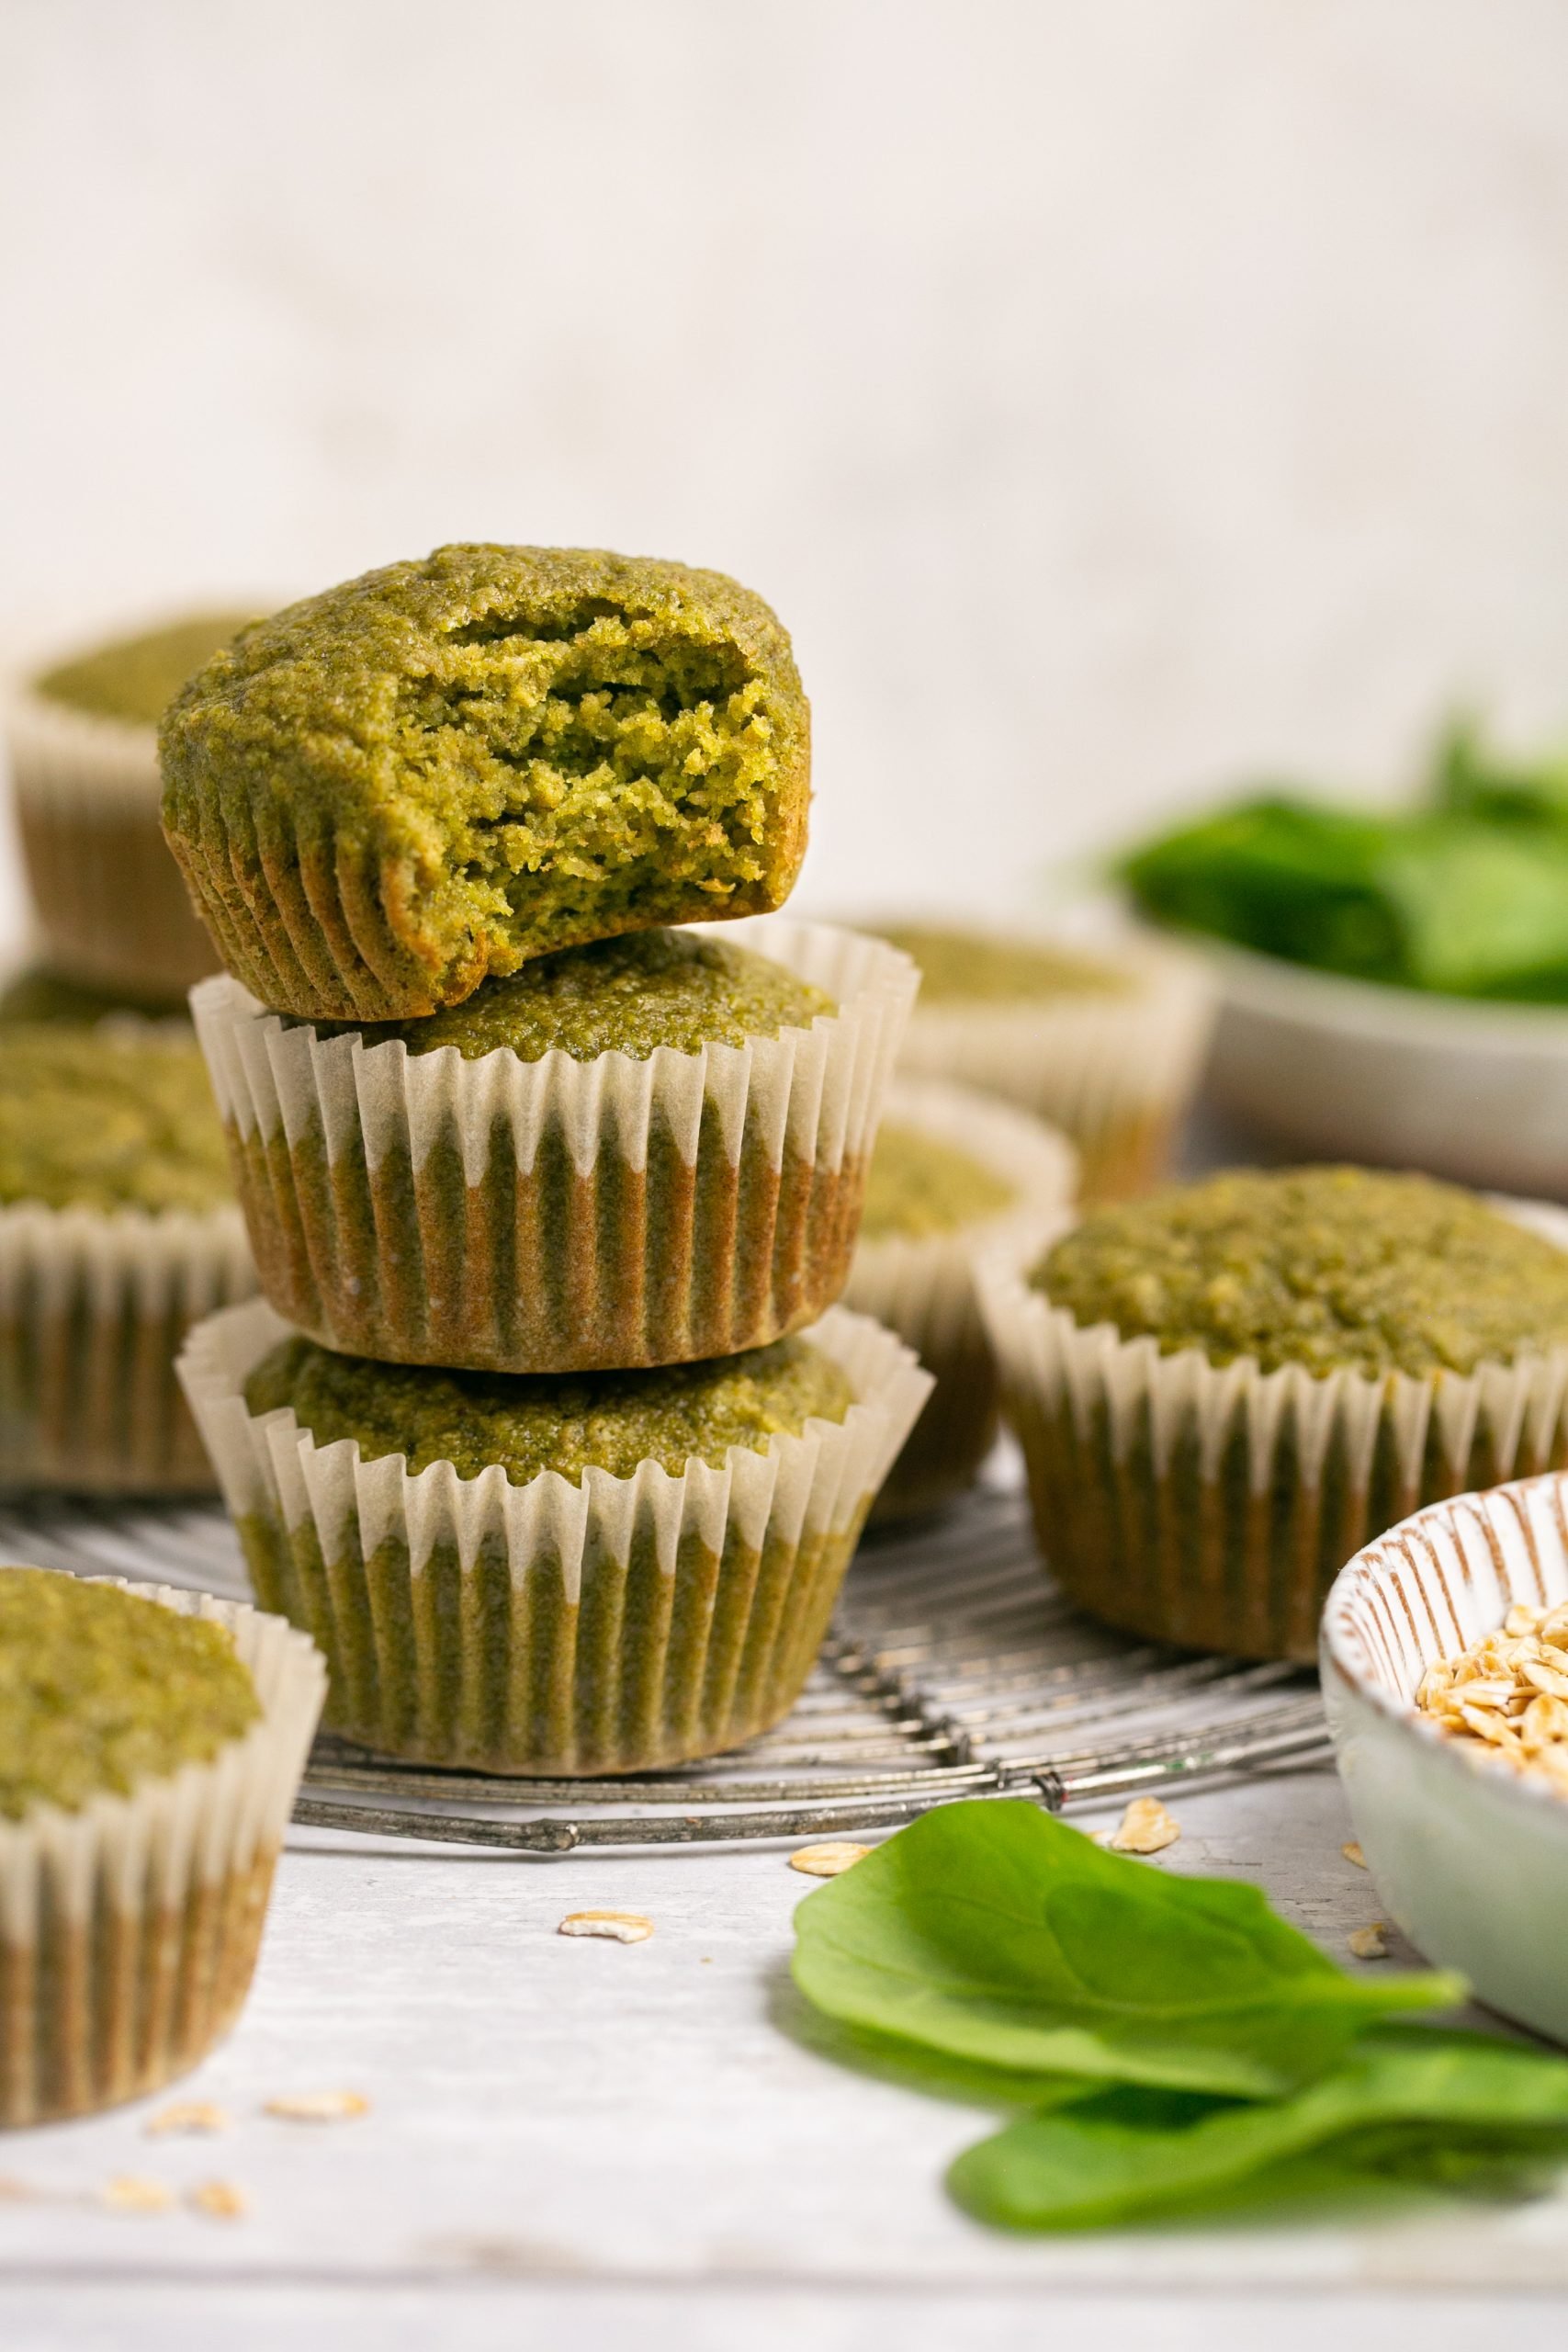 3 green smoothie muffins stacked on top of one another. The top one has a bite out of it. You can see more muffins and muffin ingredients blurred in the background. 